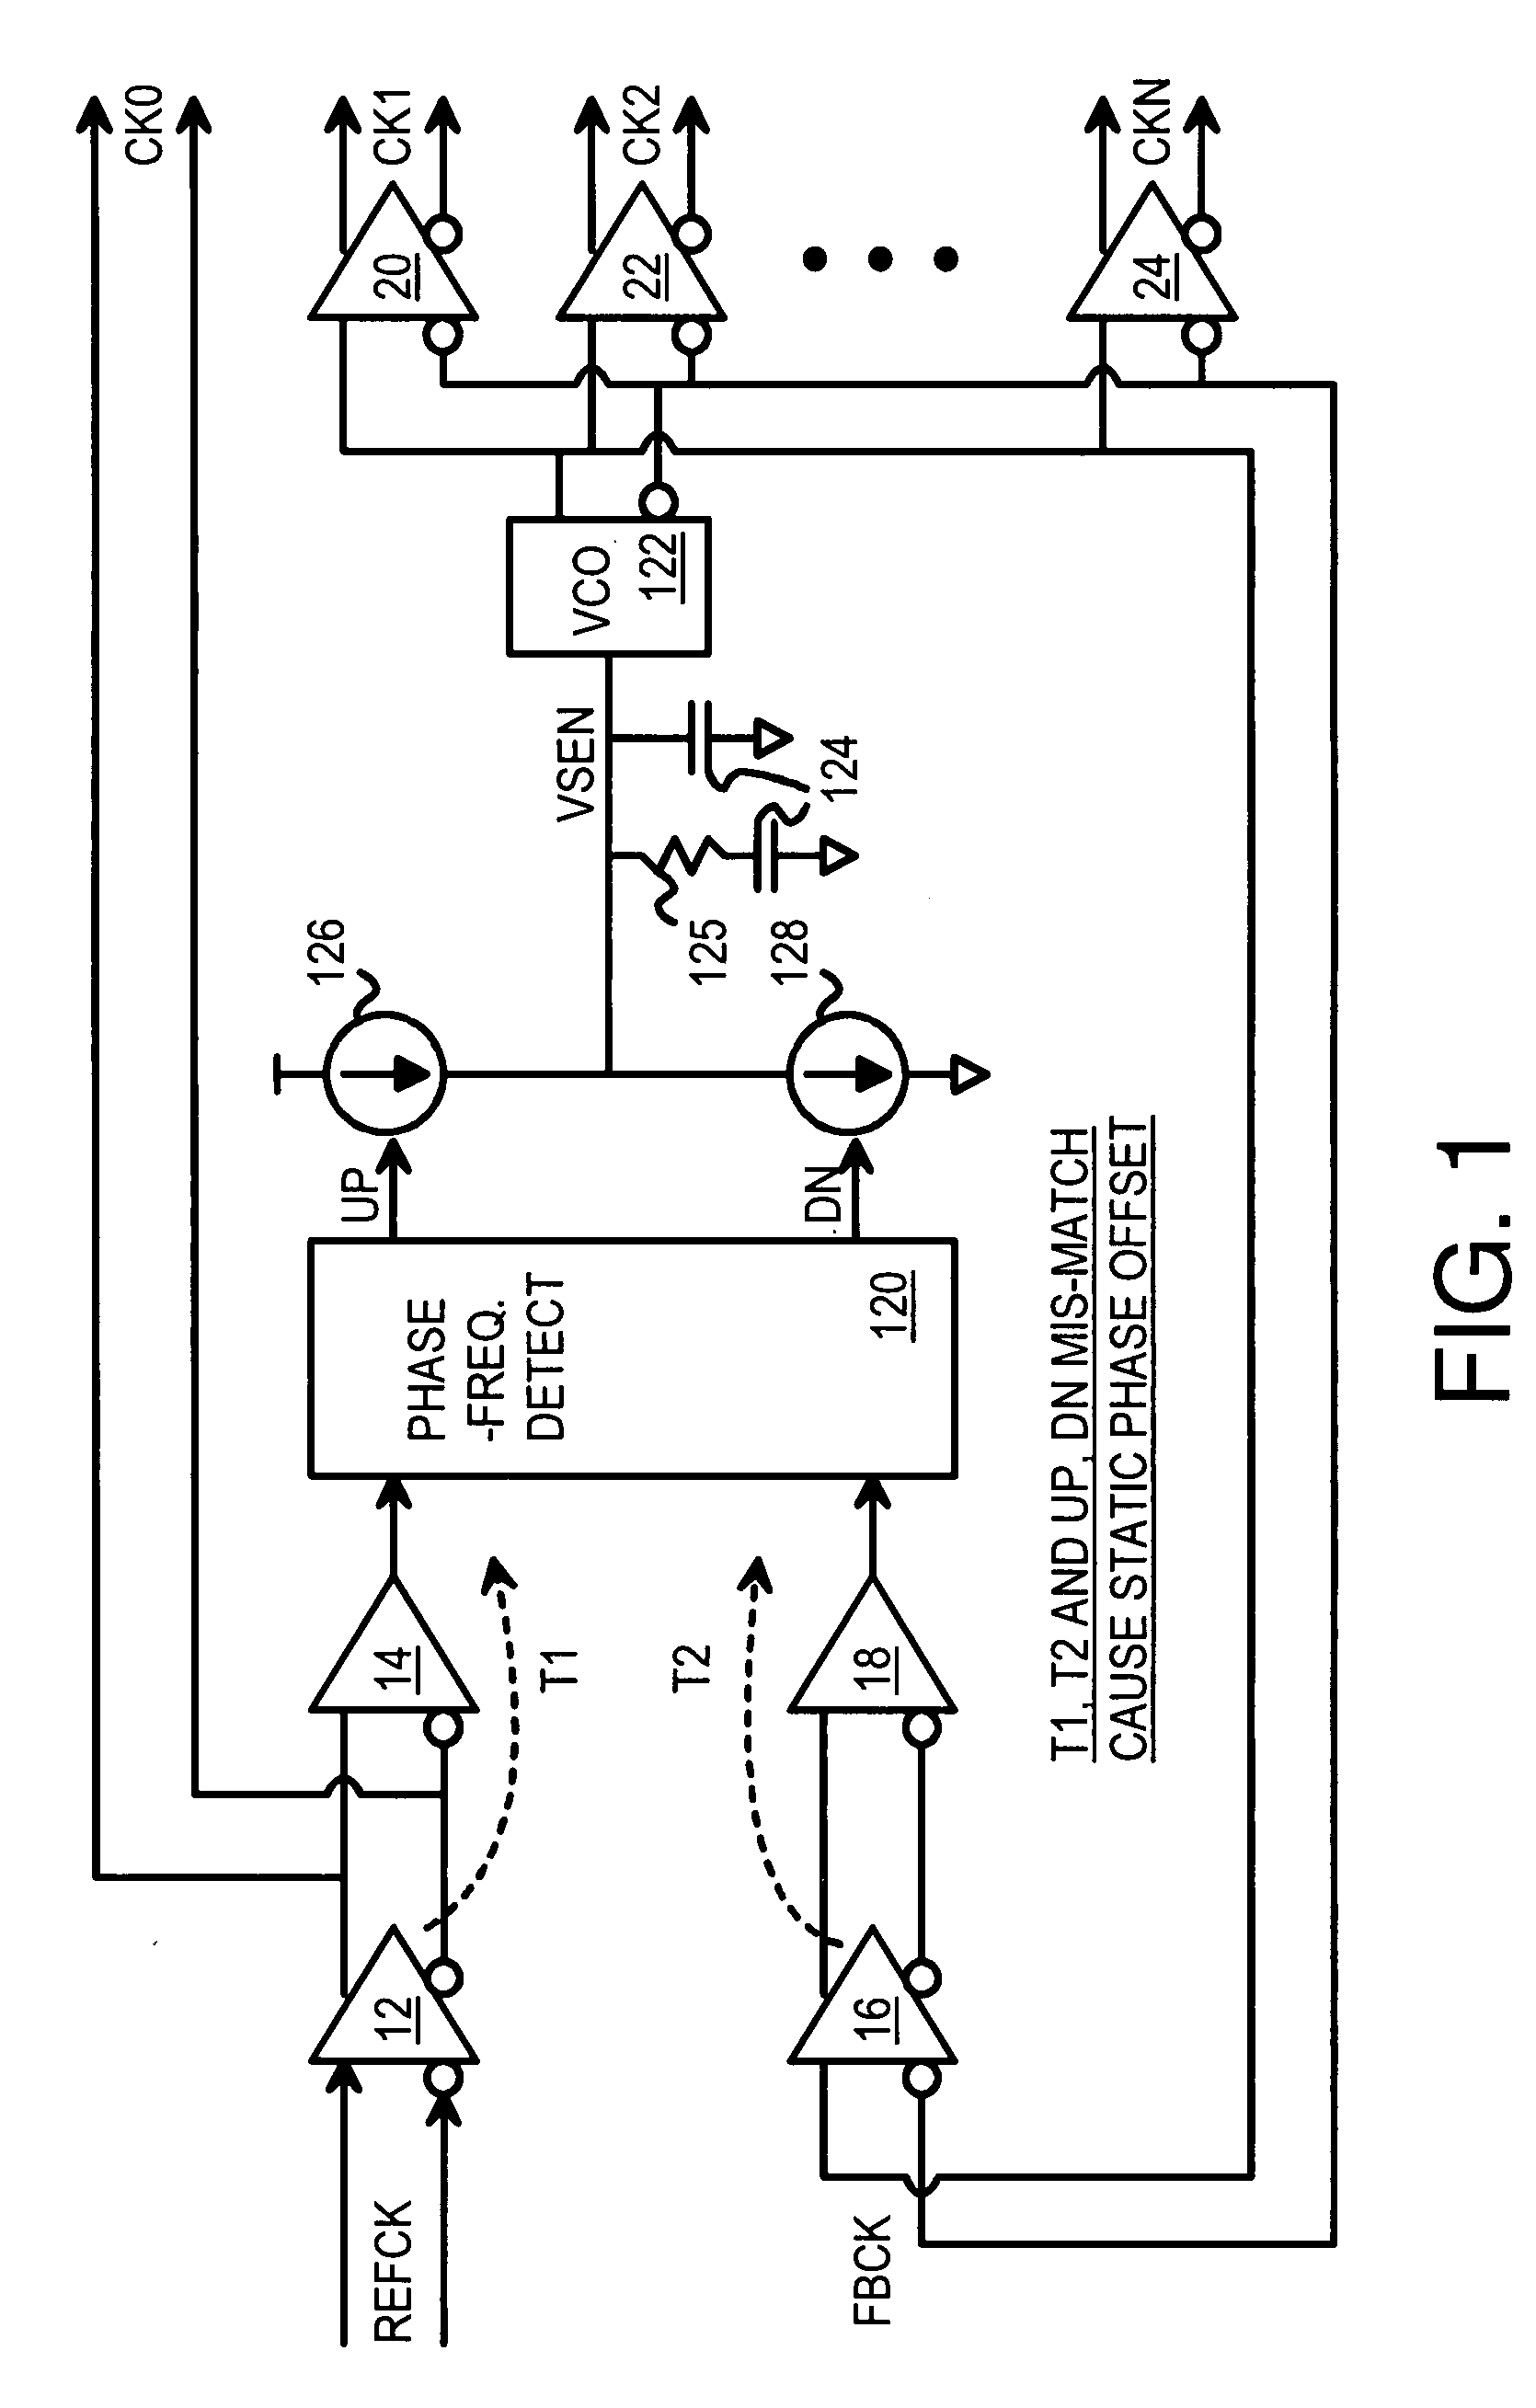 Zero-delay buffer with common-mode equalizer for input and feedback differential clocks into a phase-locked loop (PLL)